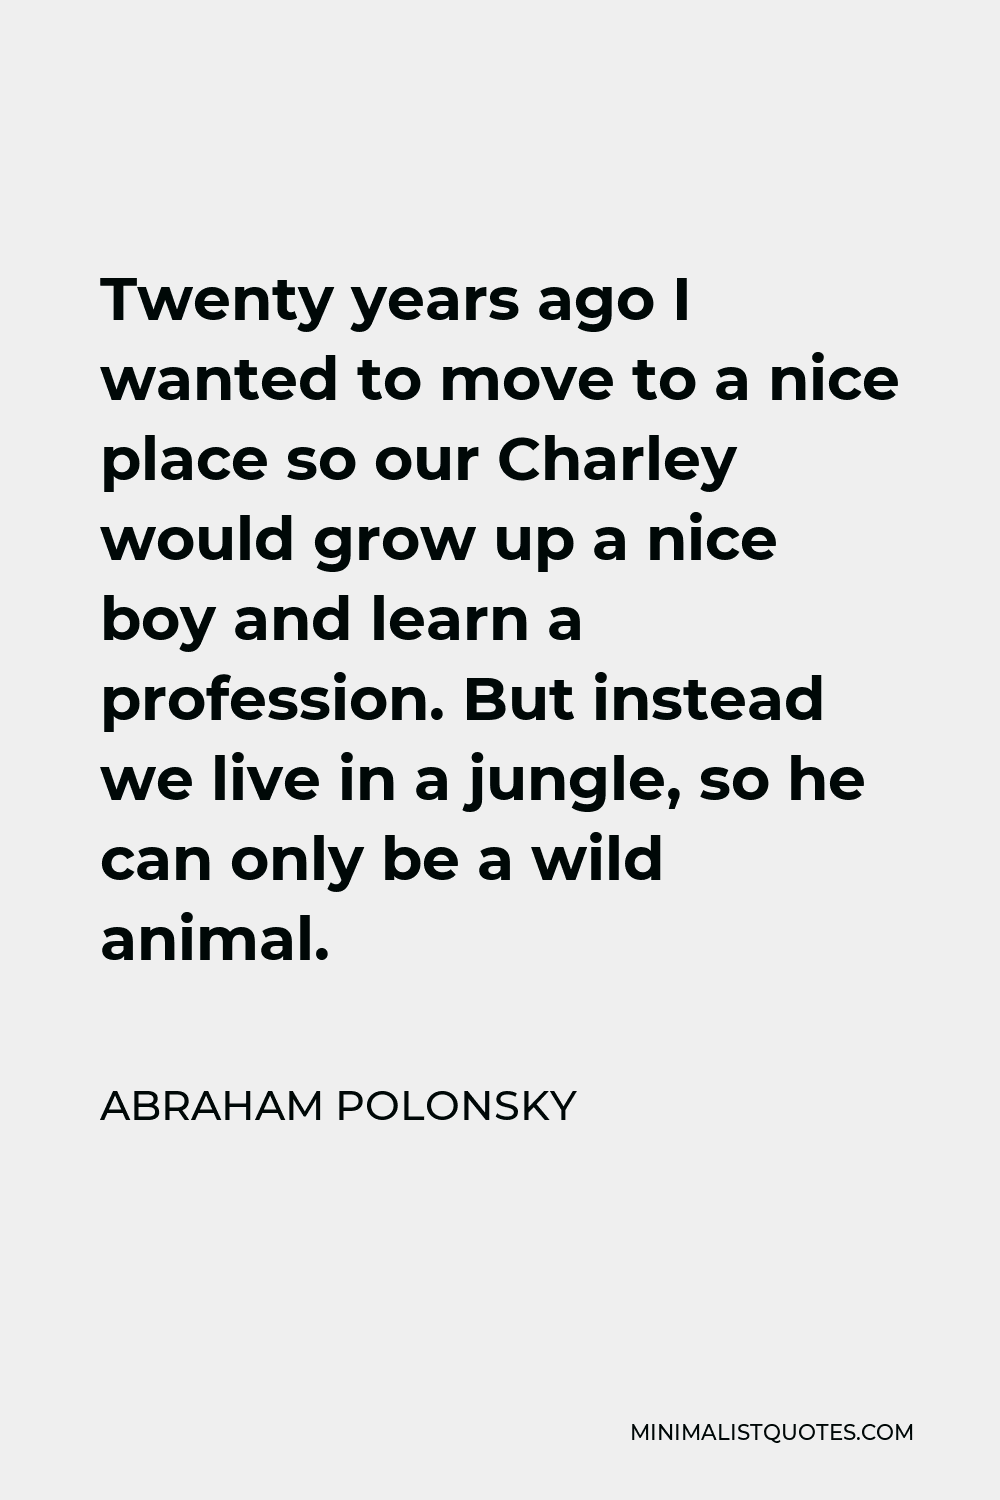 Abraham Polonsky Quote - Twenty years ago I wanted to move to a nice place so our Charley would grow up a nice boy and learn a profession. But instead we live in a jungle, so he can only be a wild animal.